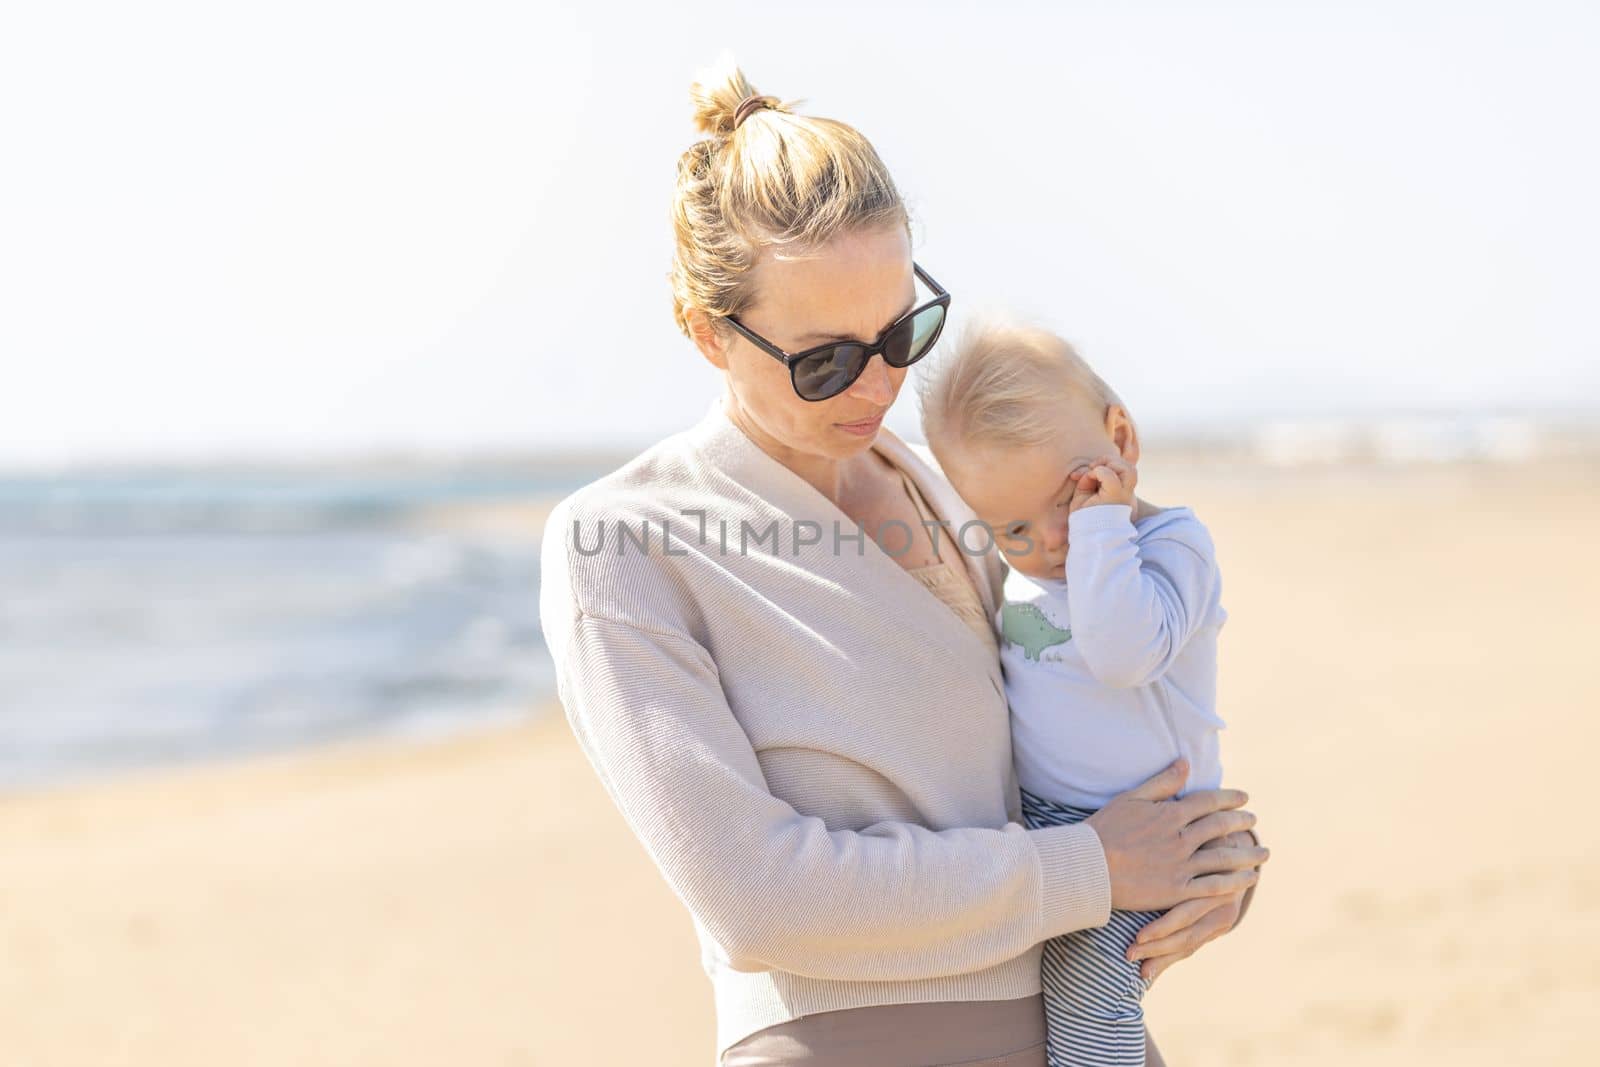 Mother holding and carrying his infant baby boy son on sandy beach enjoying summer vacationson on Lanzarote island, Spain. Family travel and vacations concept